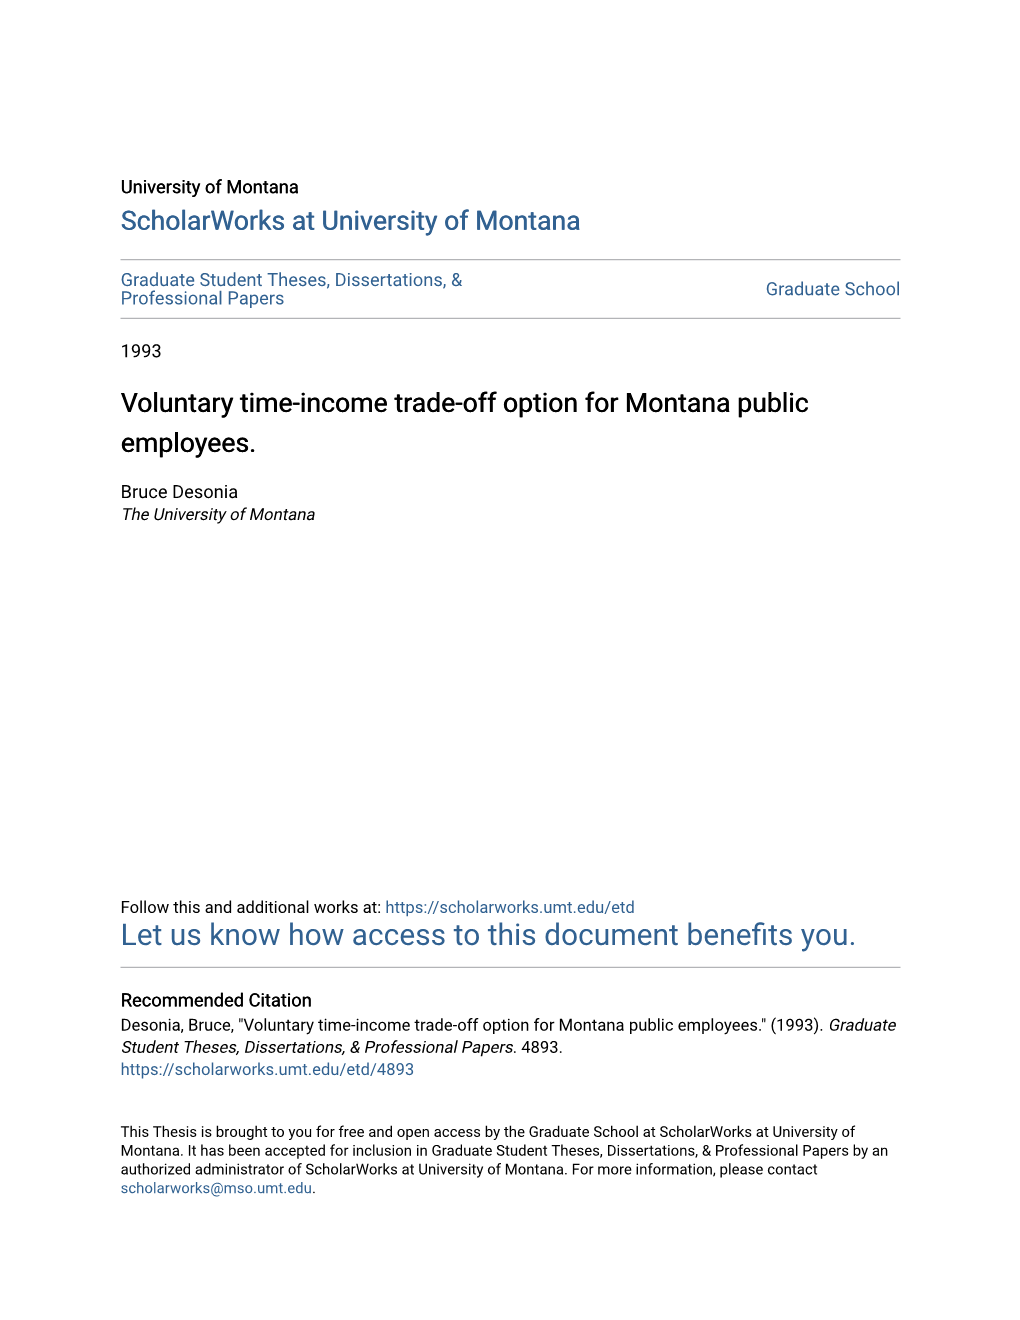 Voluntary Time-Income Trade-Off Option for Montana Public Employees